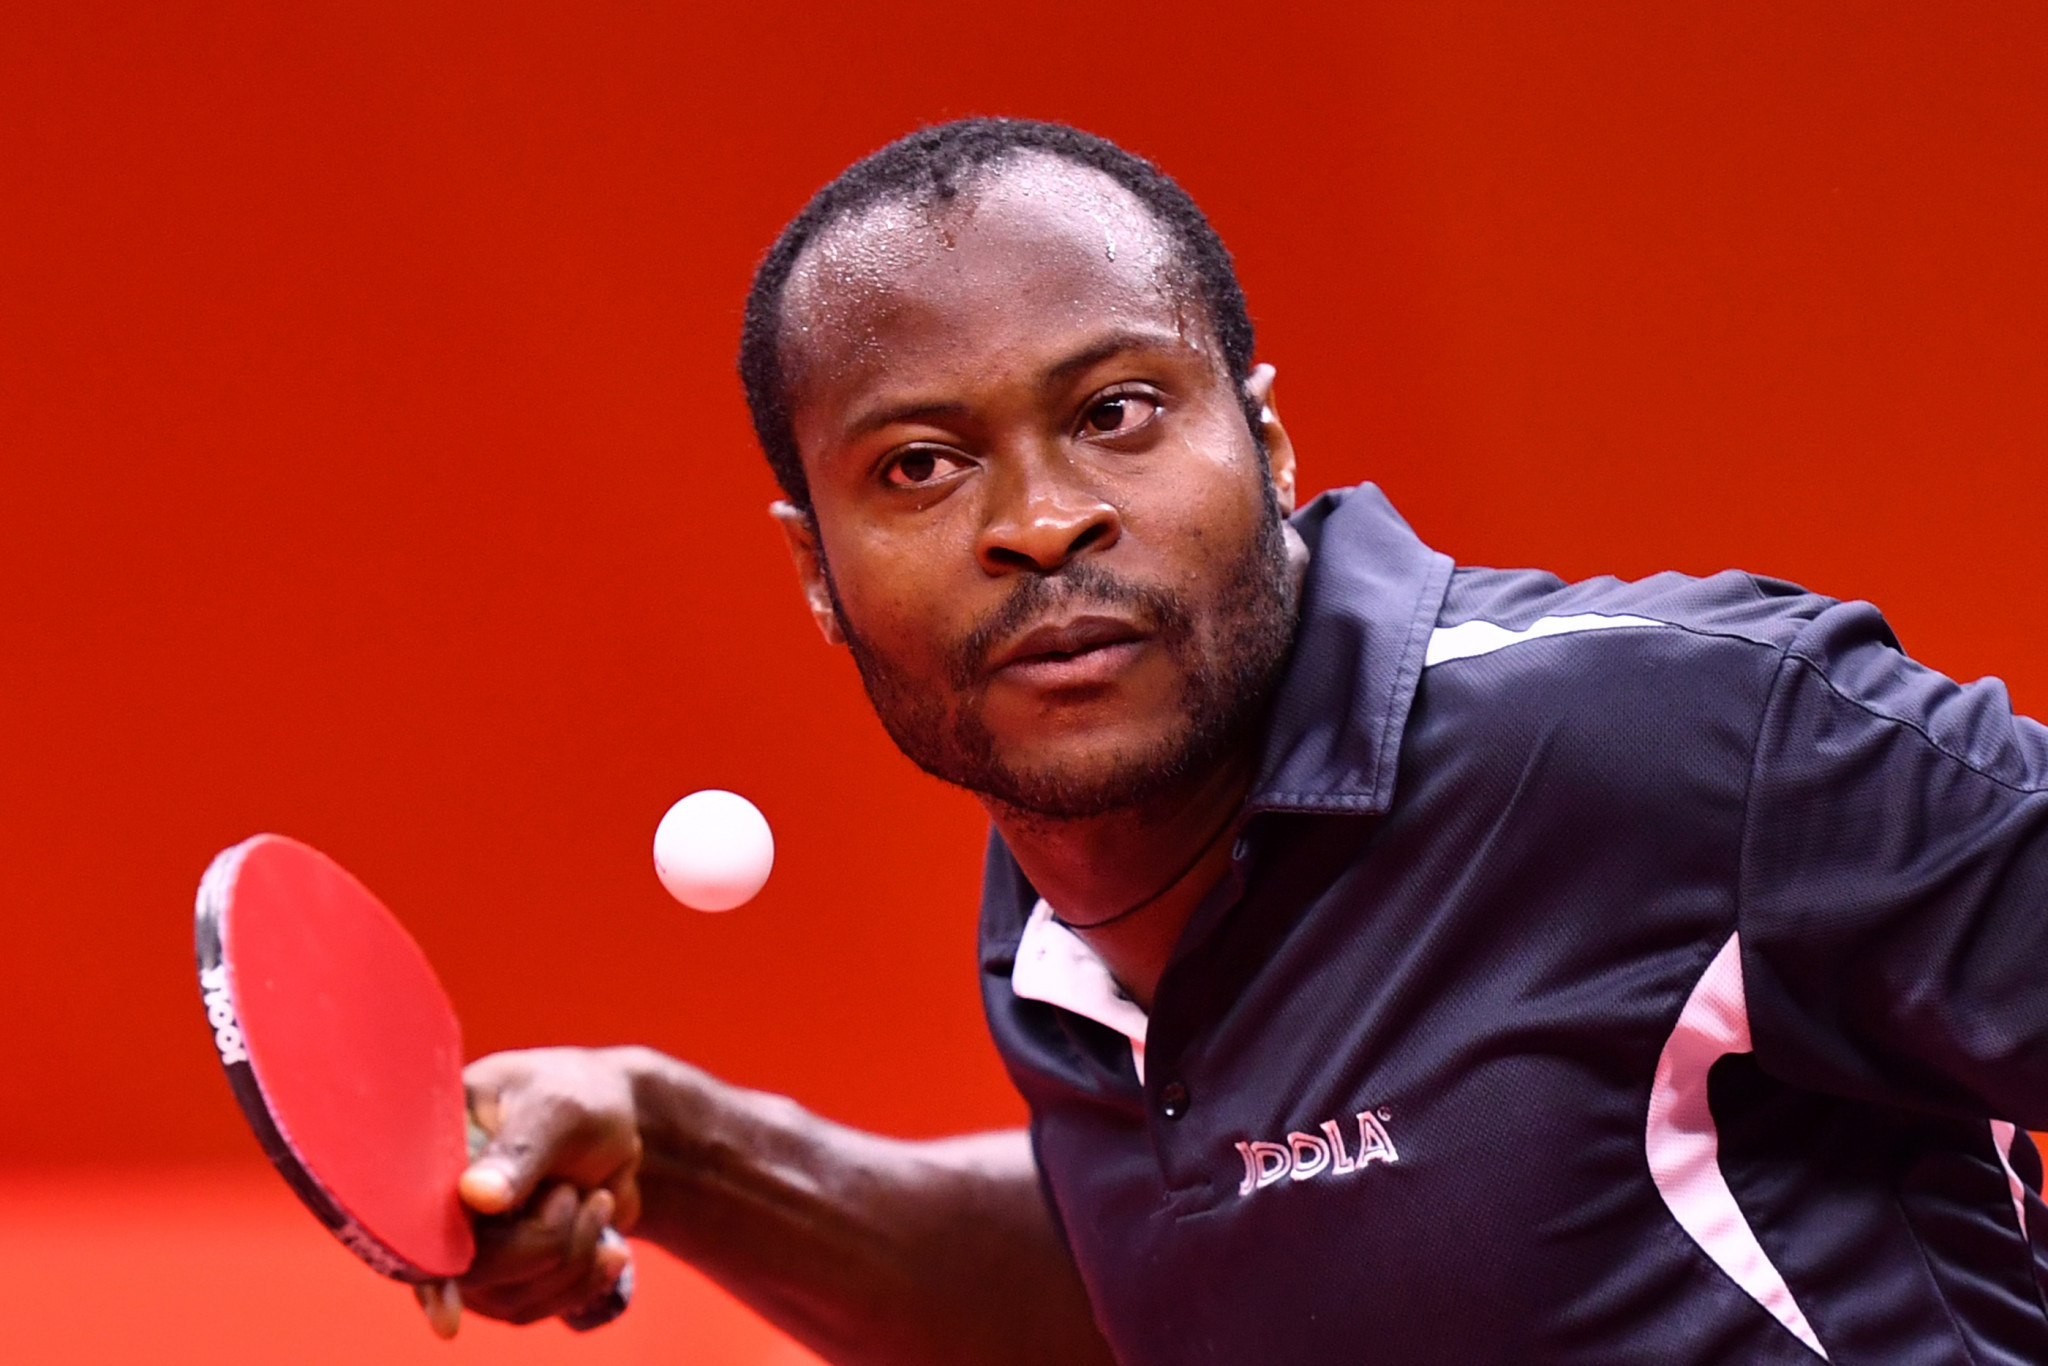 Quadri Aruna is among the players set to represent Nigeria at the 2019 African Games ©Getty Images